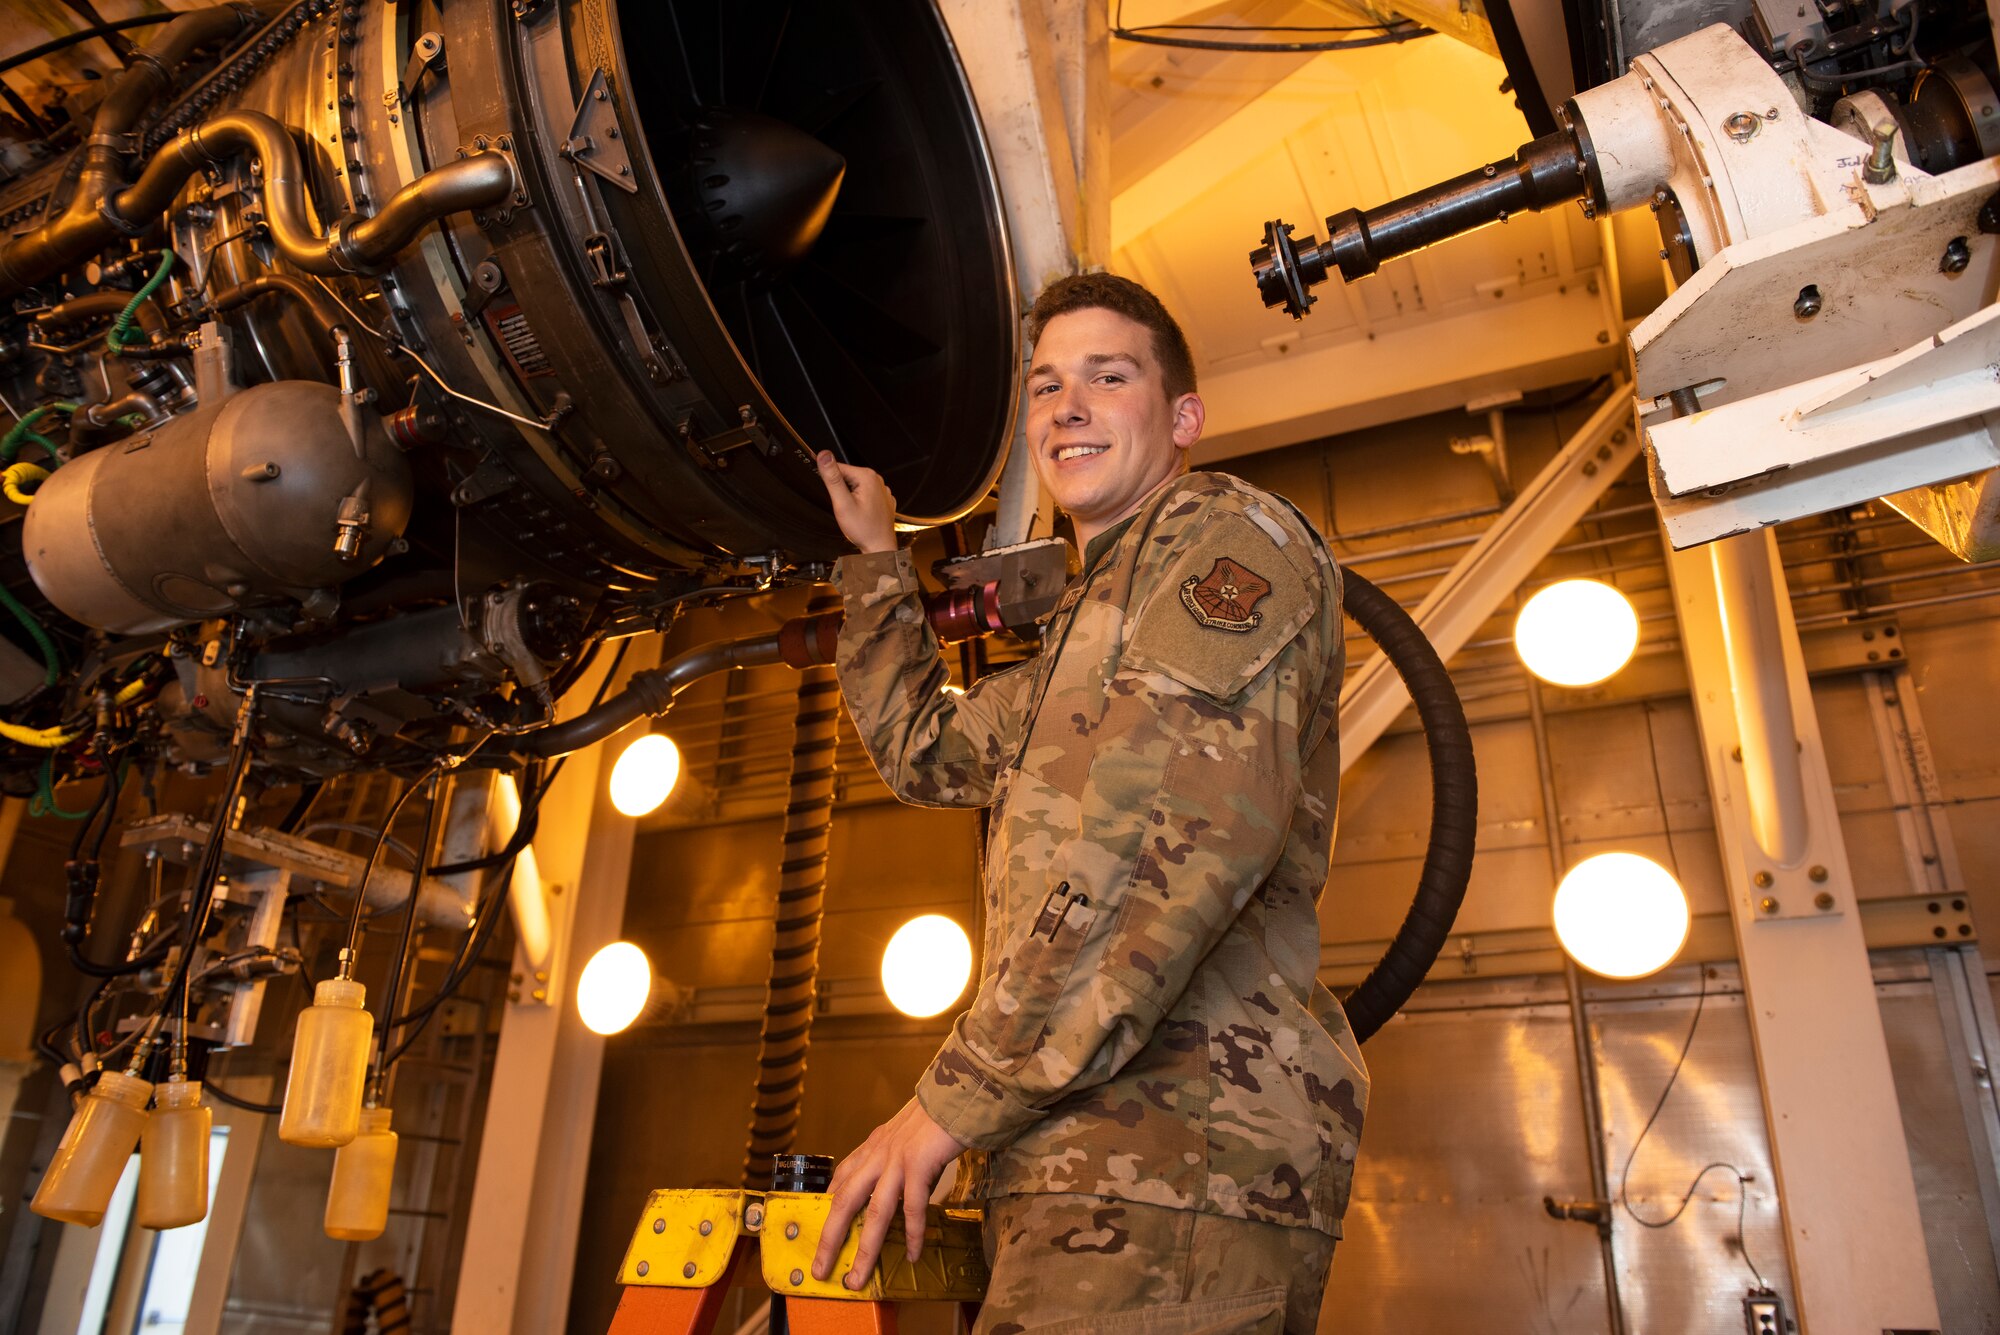 Staff Sgt. Thomas Laroue, an aerospace propulsion craftsman assigned to the 509th Maintenance Squadron jet propulsion flight, poses for a portrait on July 9, 2019, at Whiteman Air Force Base, Missouri. Laroue and other members of his flight run diagnostic tests and perform regular maintenance on F-118 engines on a daily basis to ensure the readiness of the B-2 Spirit fleet at Whiteman AFB. (U.S. Air Force photo by Staff Sgt. Kayla White)